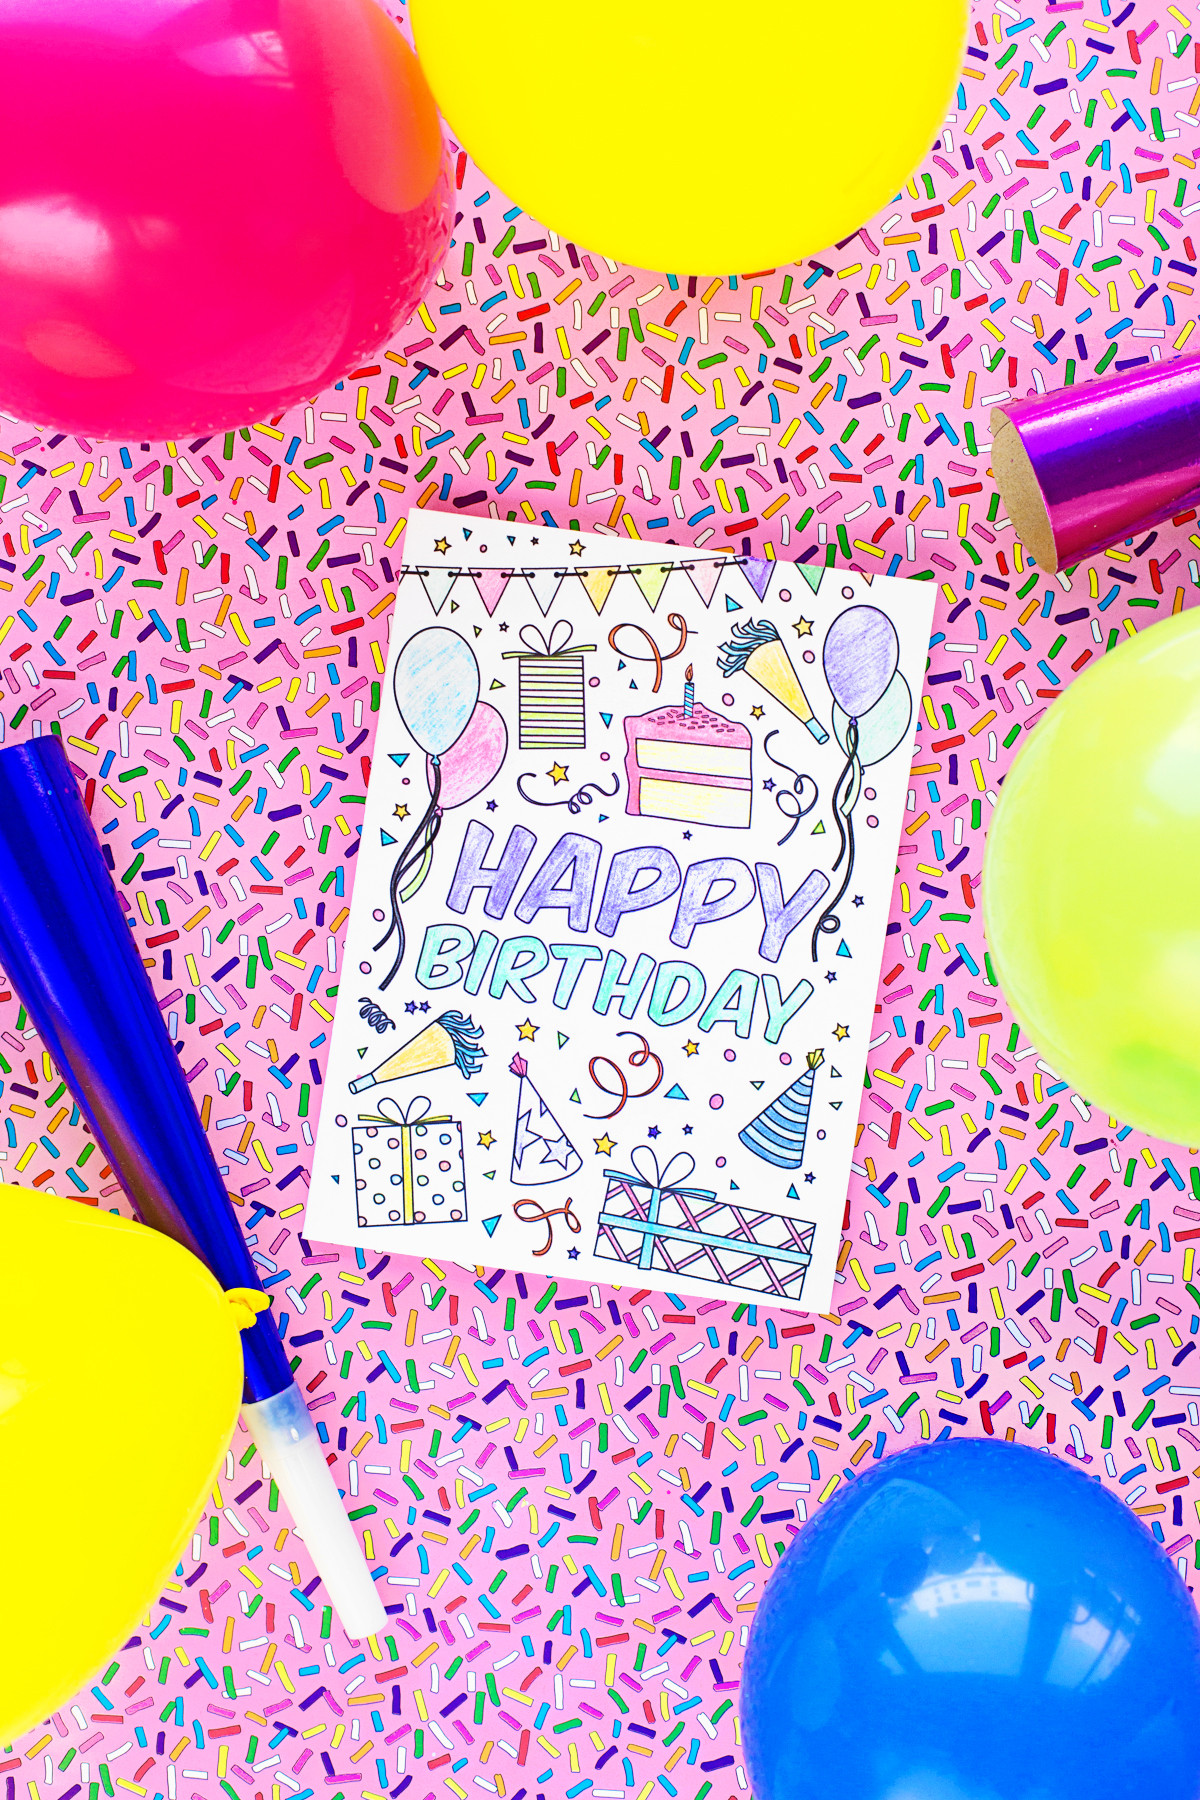 Printable Birthday Cards For Kids
 Free Printable Birthday Cards for Kids Studio DIY